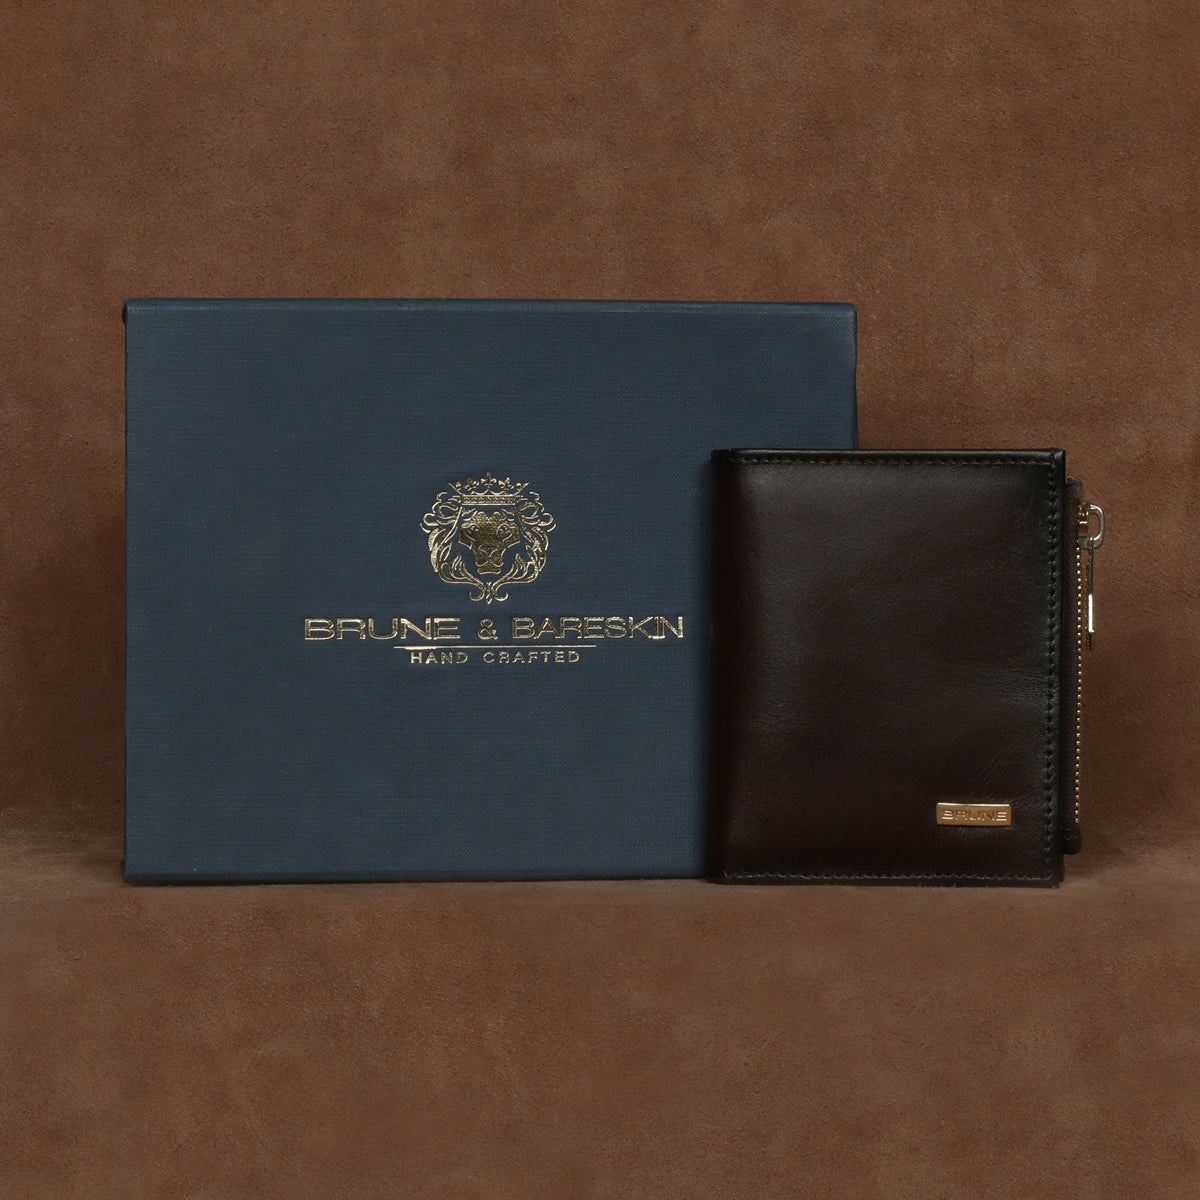 multi color leather wallet with snap closure — MUSEUM OUTLETS